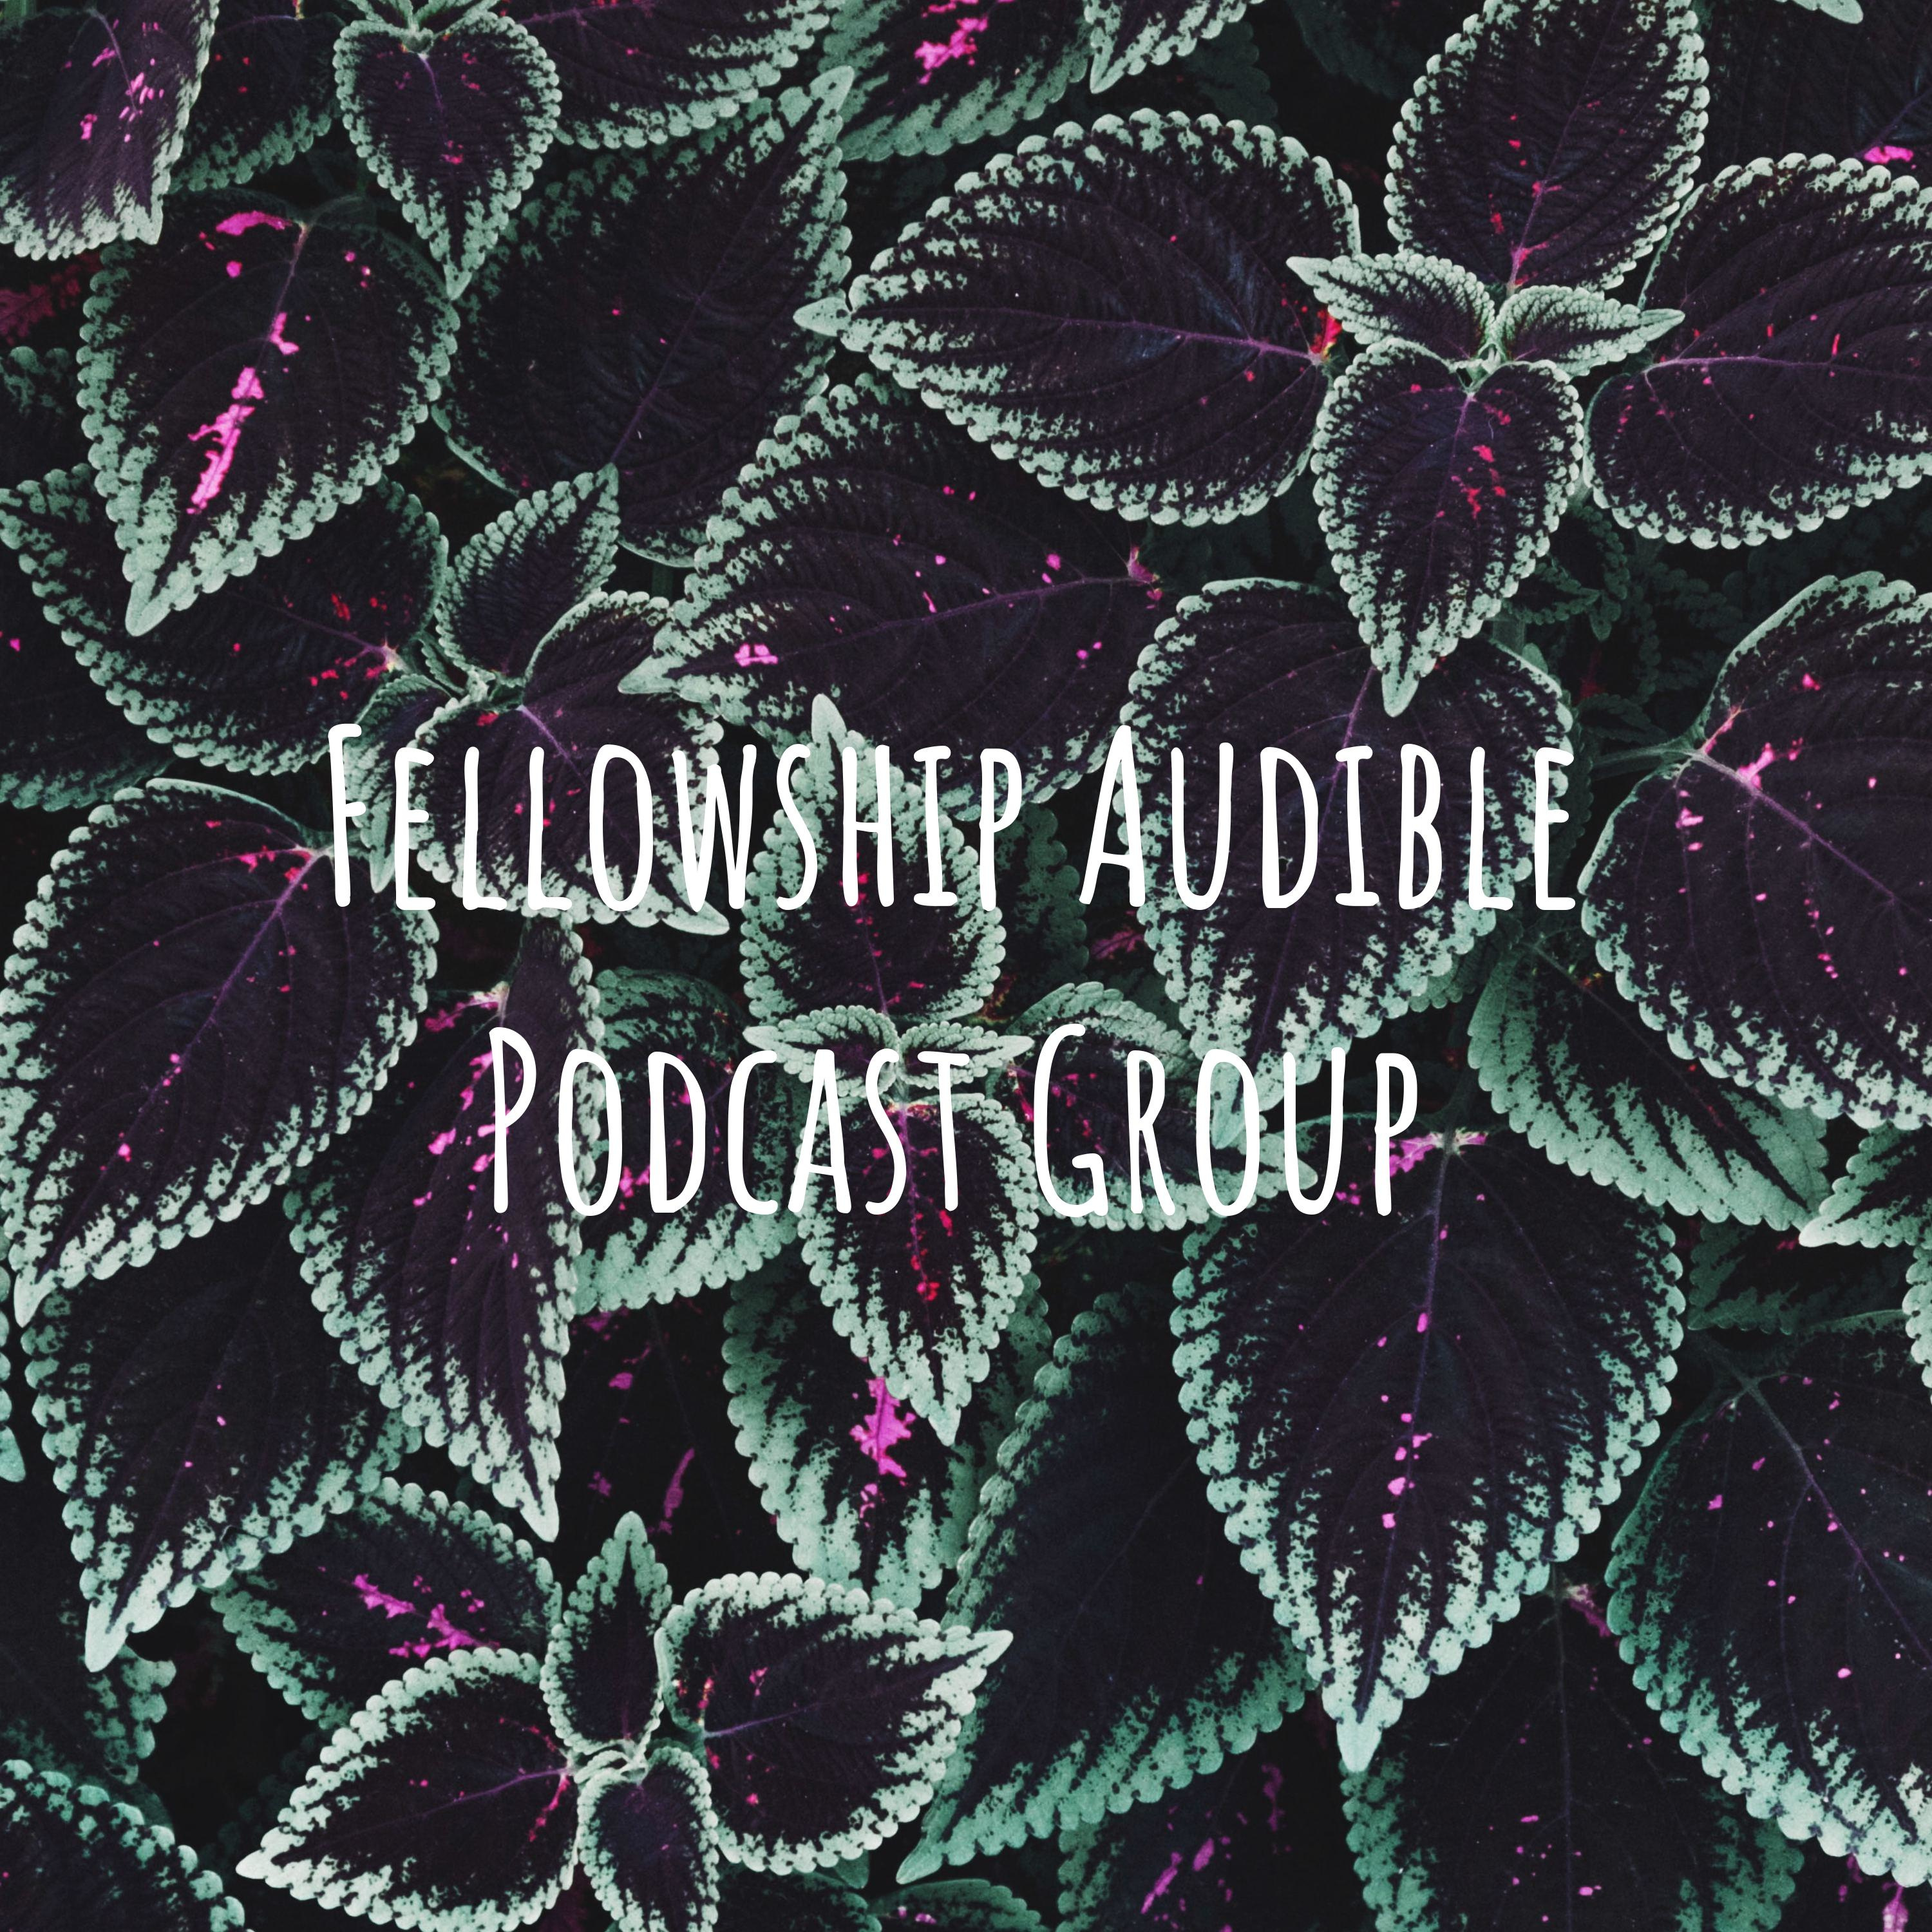 Fellowship Audio Podcast 29MAY19 | Which is my idea